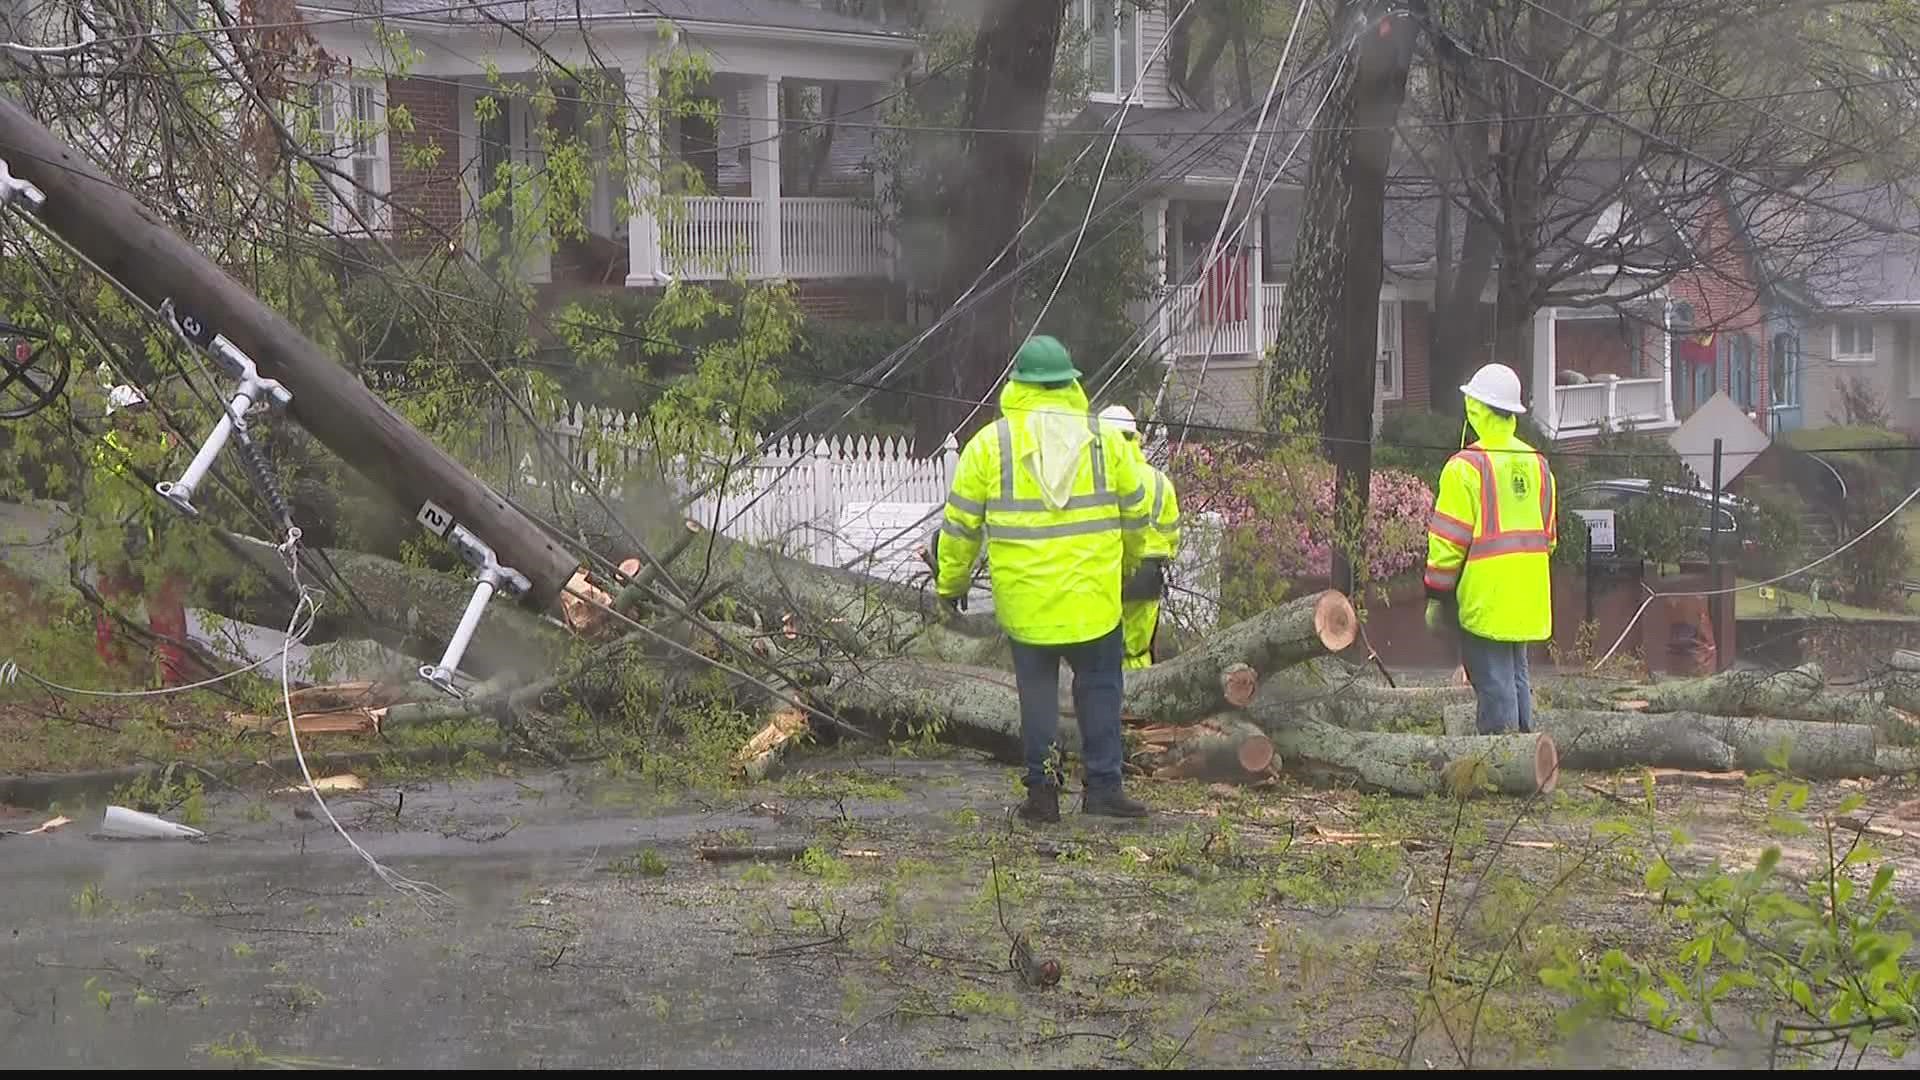 Downed trees knockdown power poles, disrupt electricity in several neighborhoods.